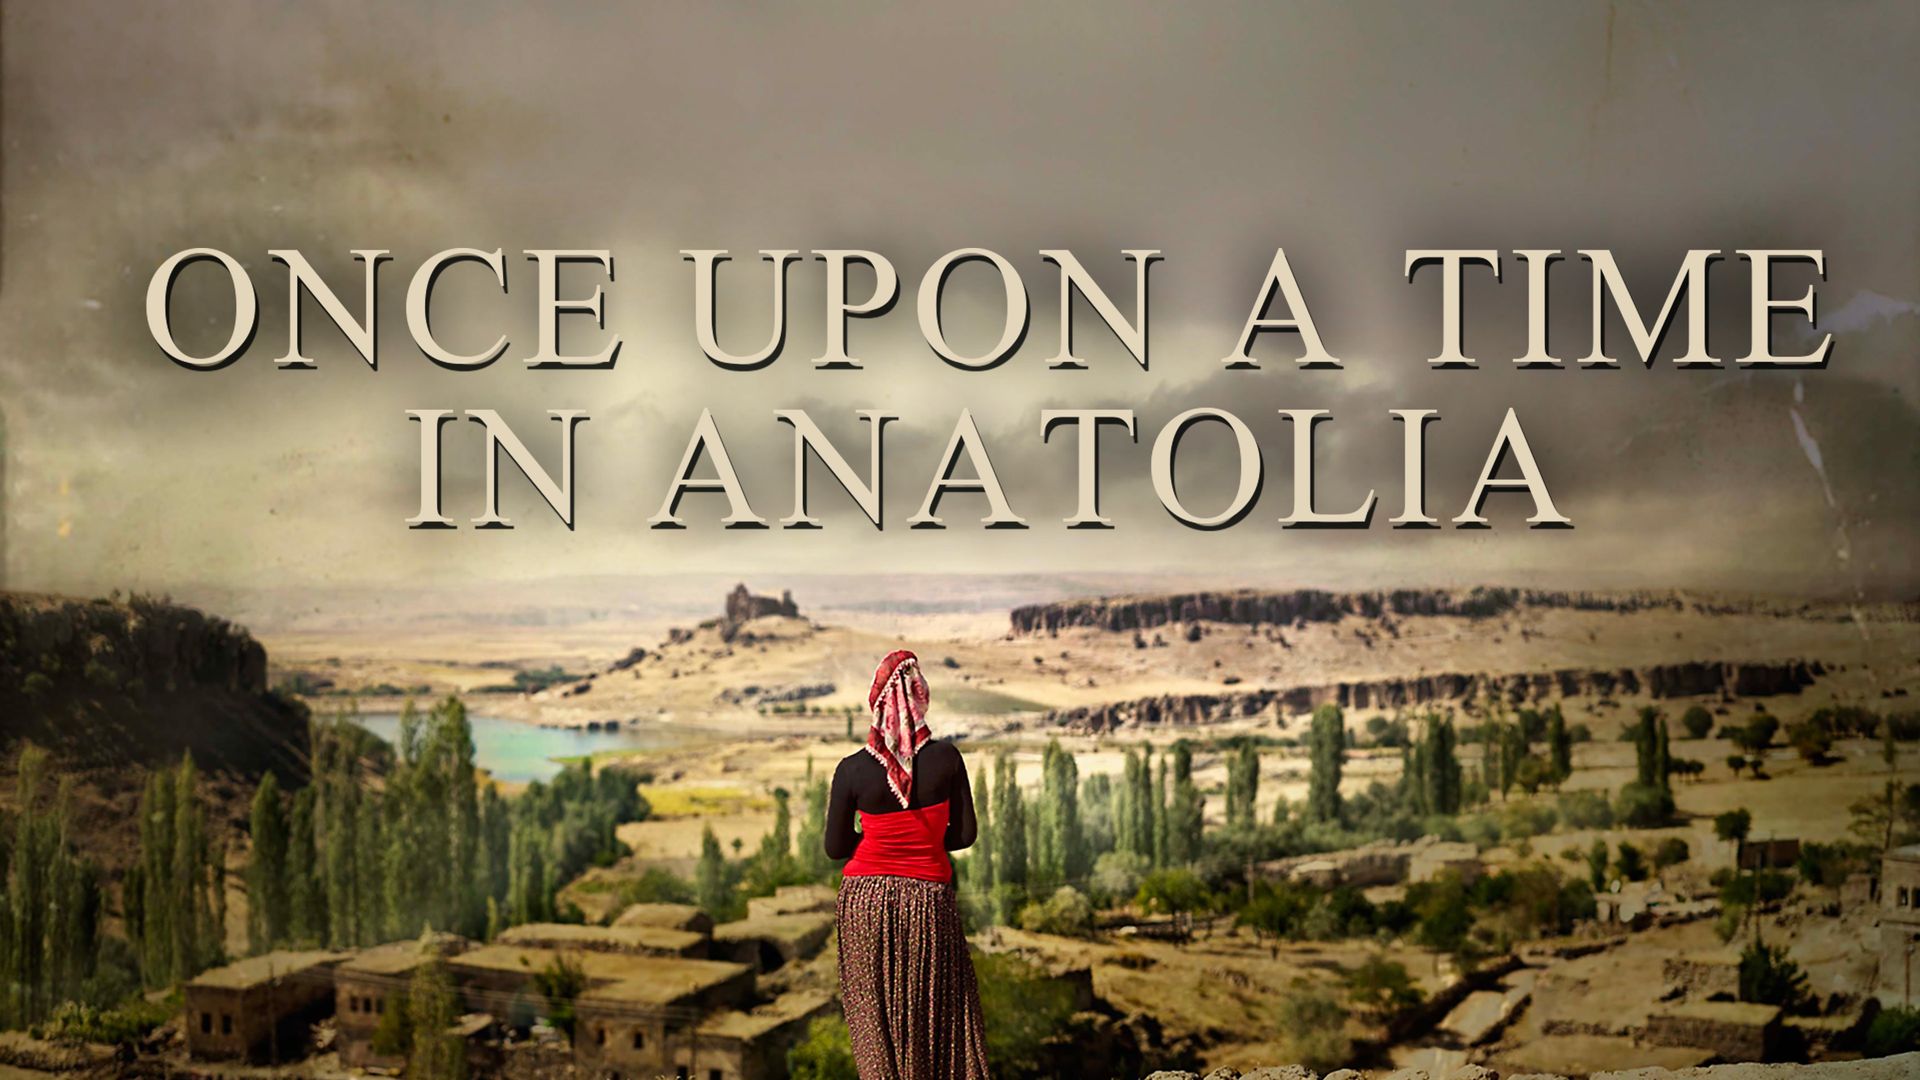 Once Upon a Time in Anatolia Backdrop